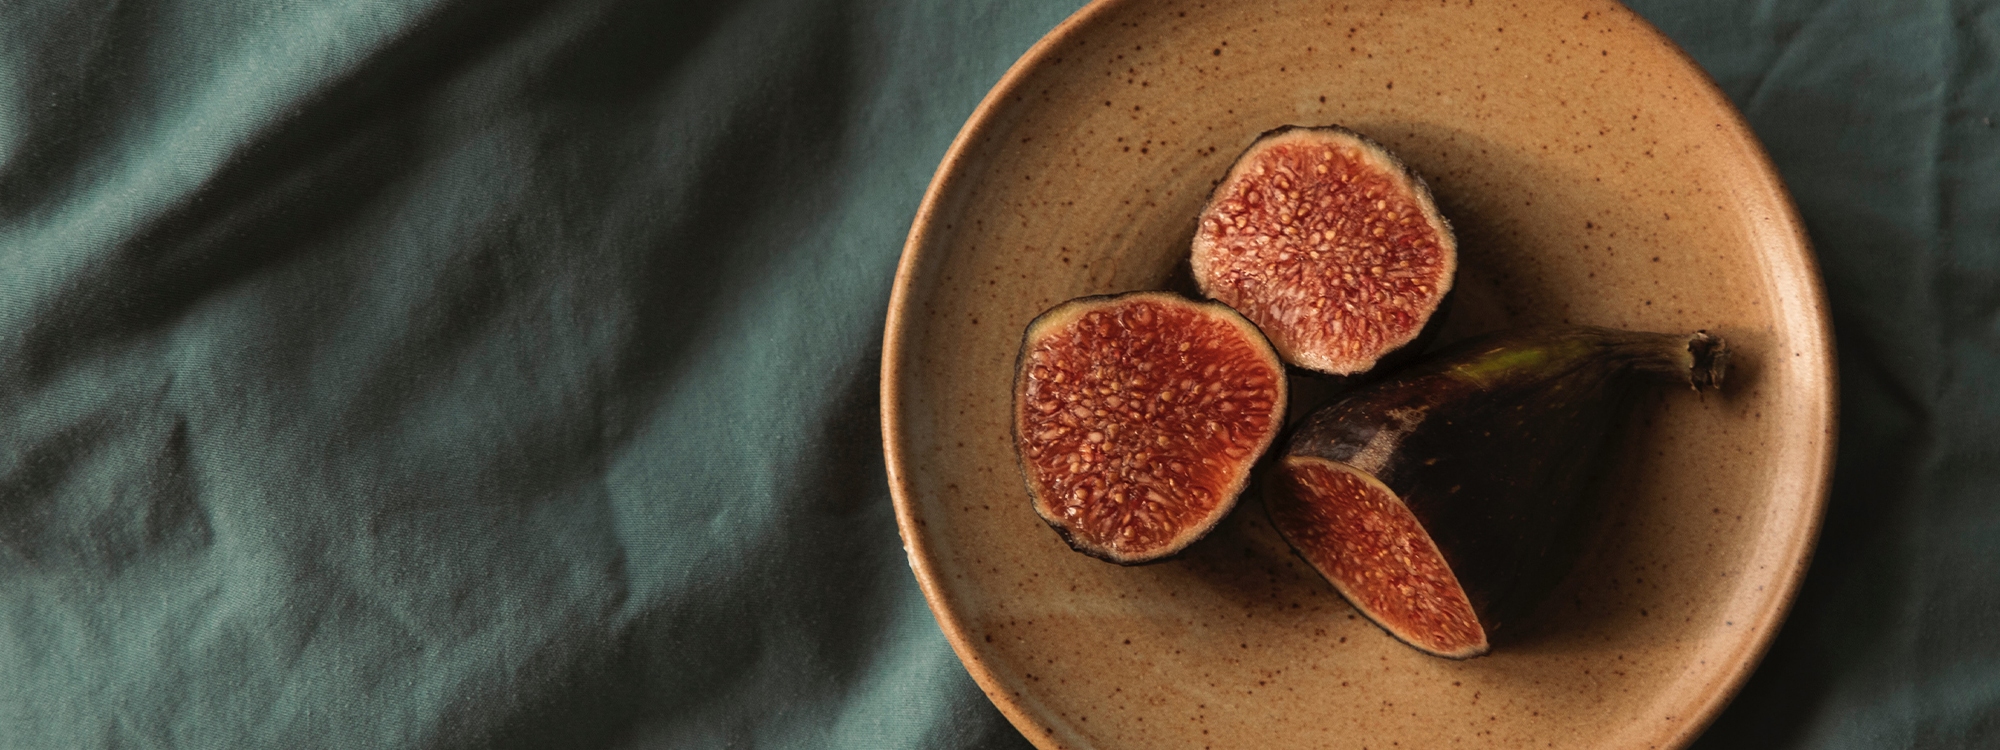 Sliced figs on a plate